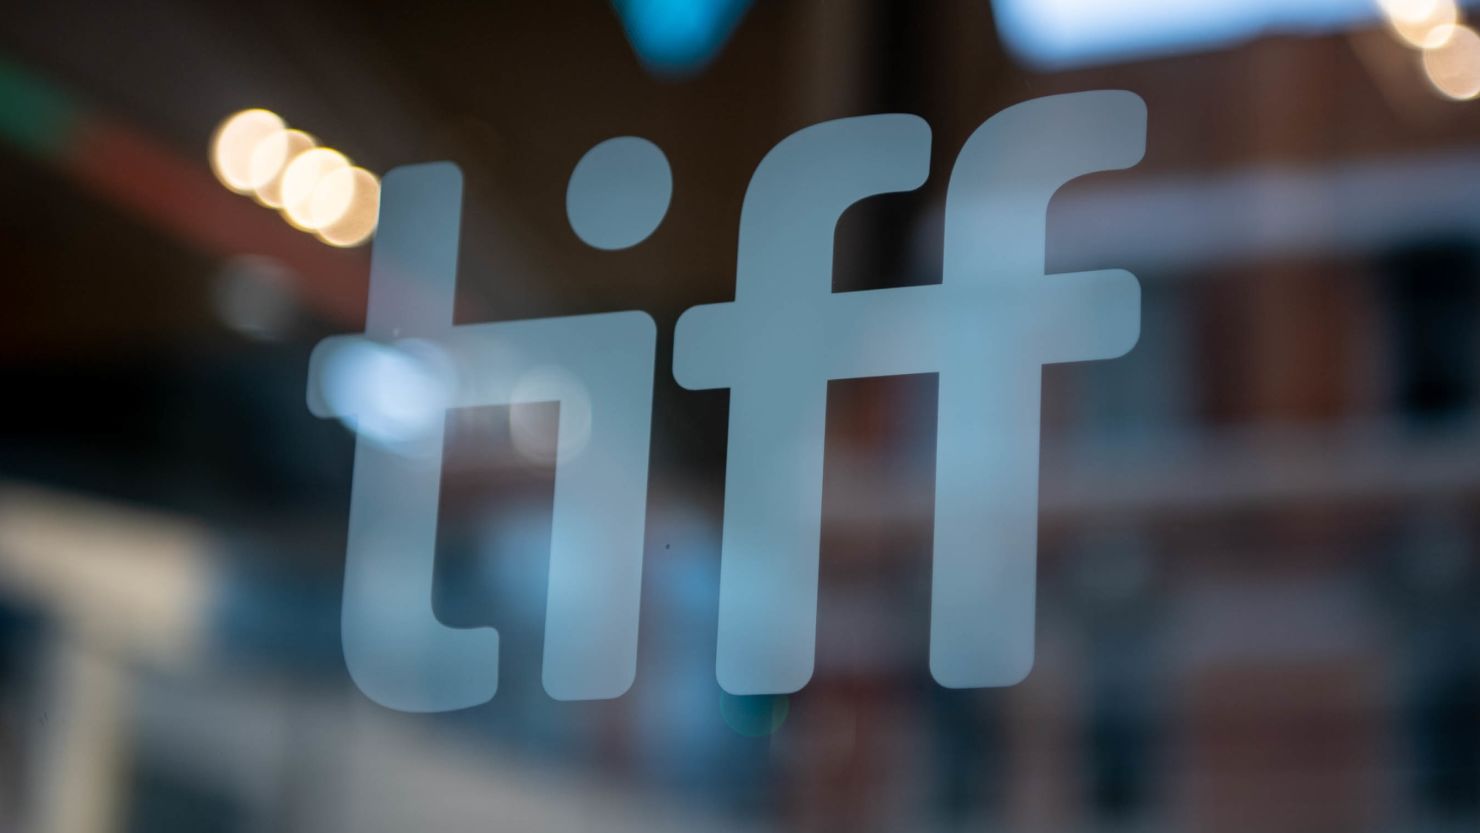 The TIFF logo is seen at the TIFF Bell Lightbox is seen at the 2020 Toronto International Film Festival on September 11, 2020 in Toronto, Ontario.